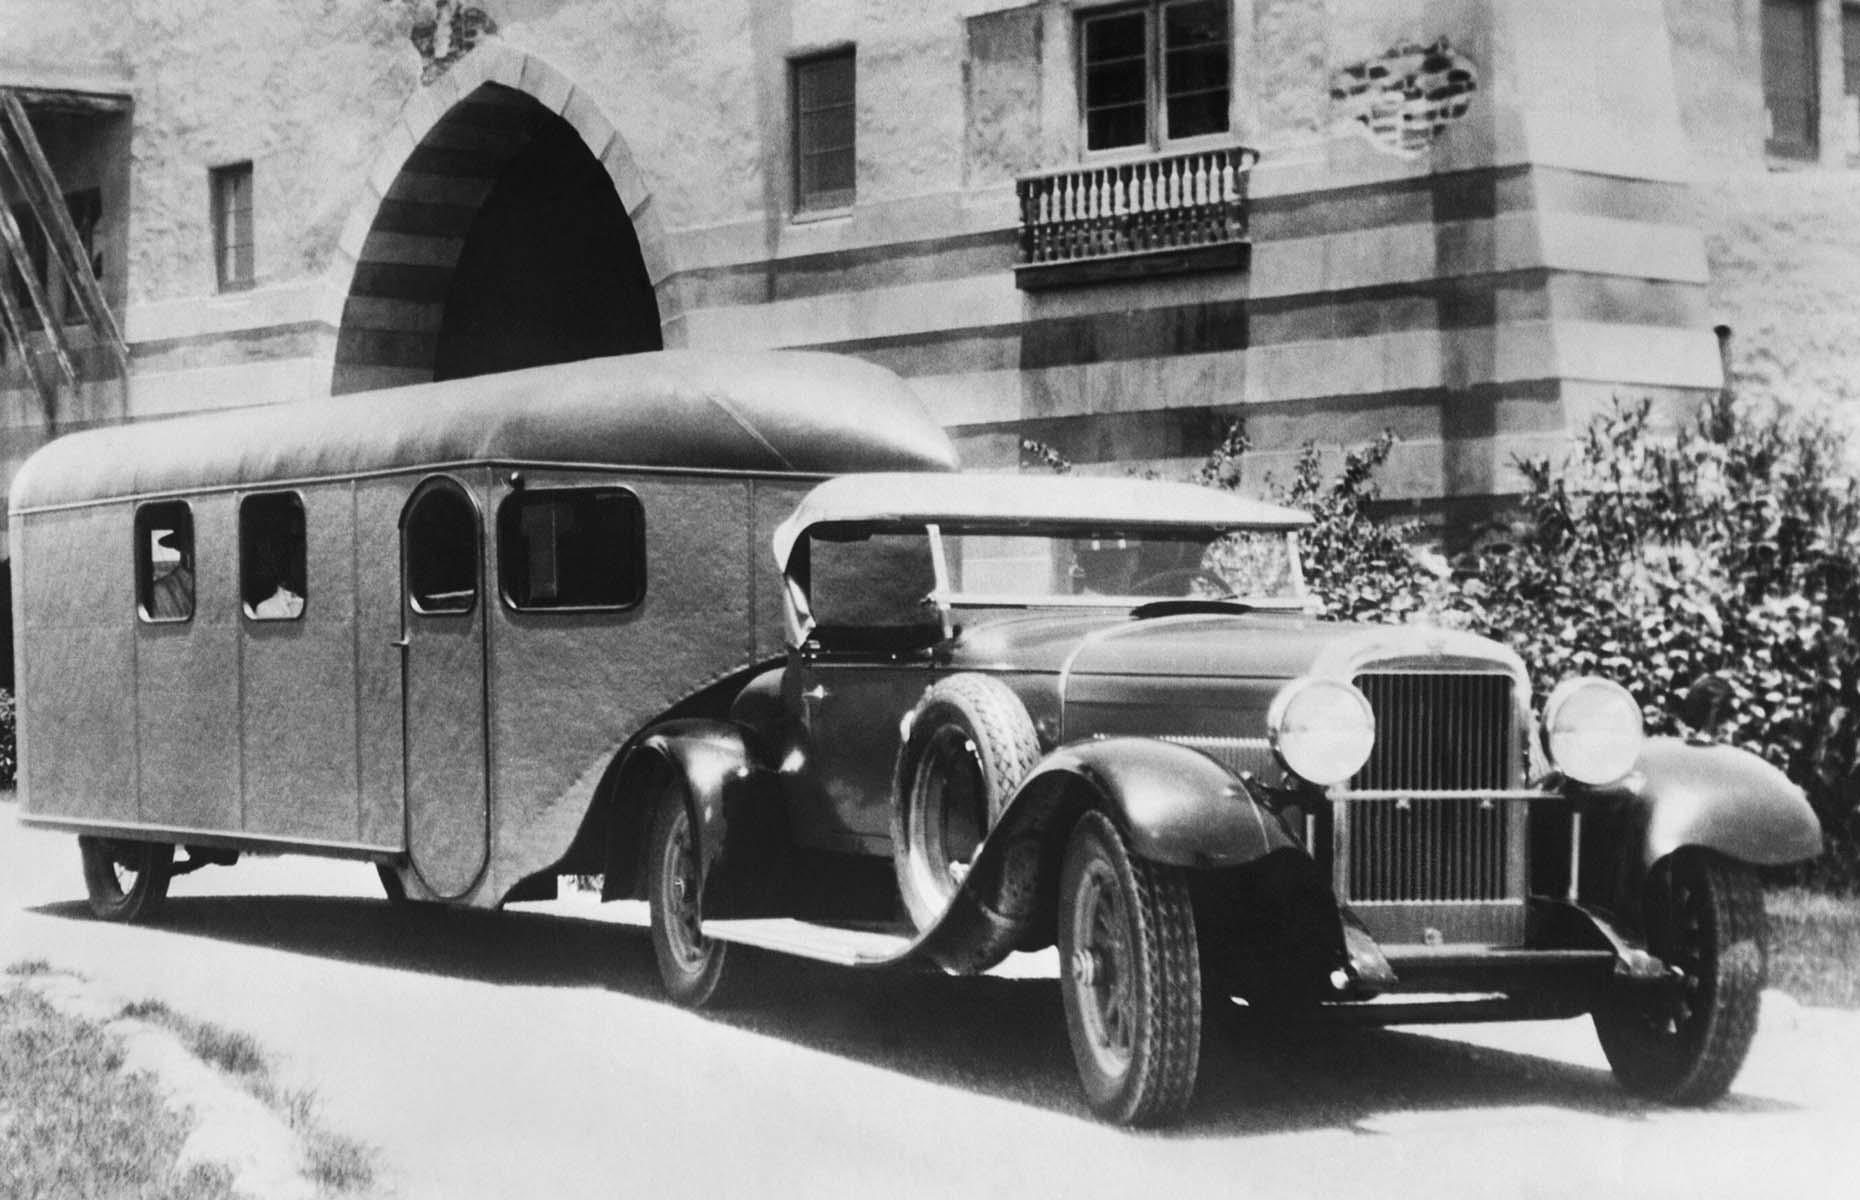 <p>Among the fanciest trailers on the market was the Curtiss Aerocar. It was tipped as a 'motor bungalow' and was fitted out with an observation deck, sleeping berths and even running water. The invention is snapped here in the 1920s, in the Floridian city of Opa-locka.</p>  <p><strong><a href="https://www.loveexploring.com/galleries/110481/the-earliest-photos-of-america-will-amaze-you">Take a look at the earliest photos of America that will amaze you</a></strong></p>